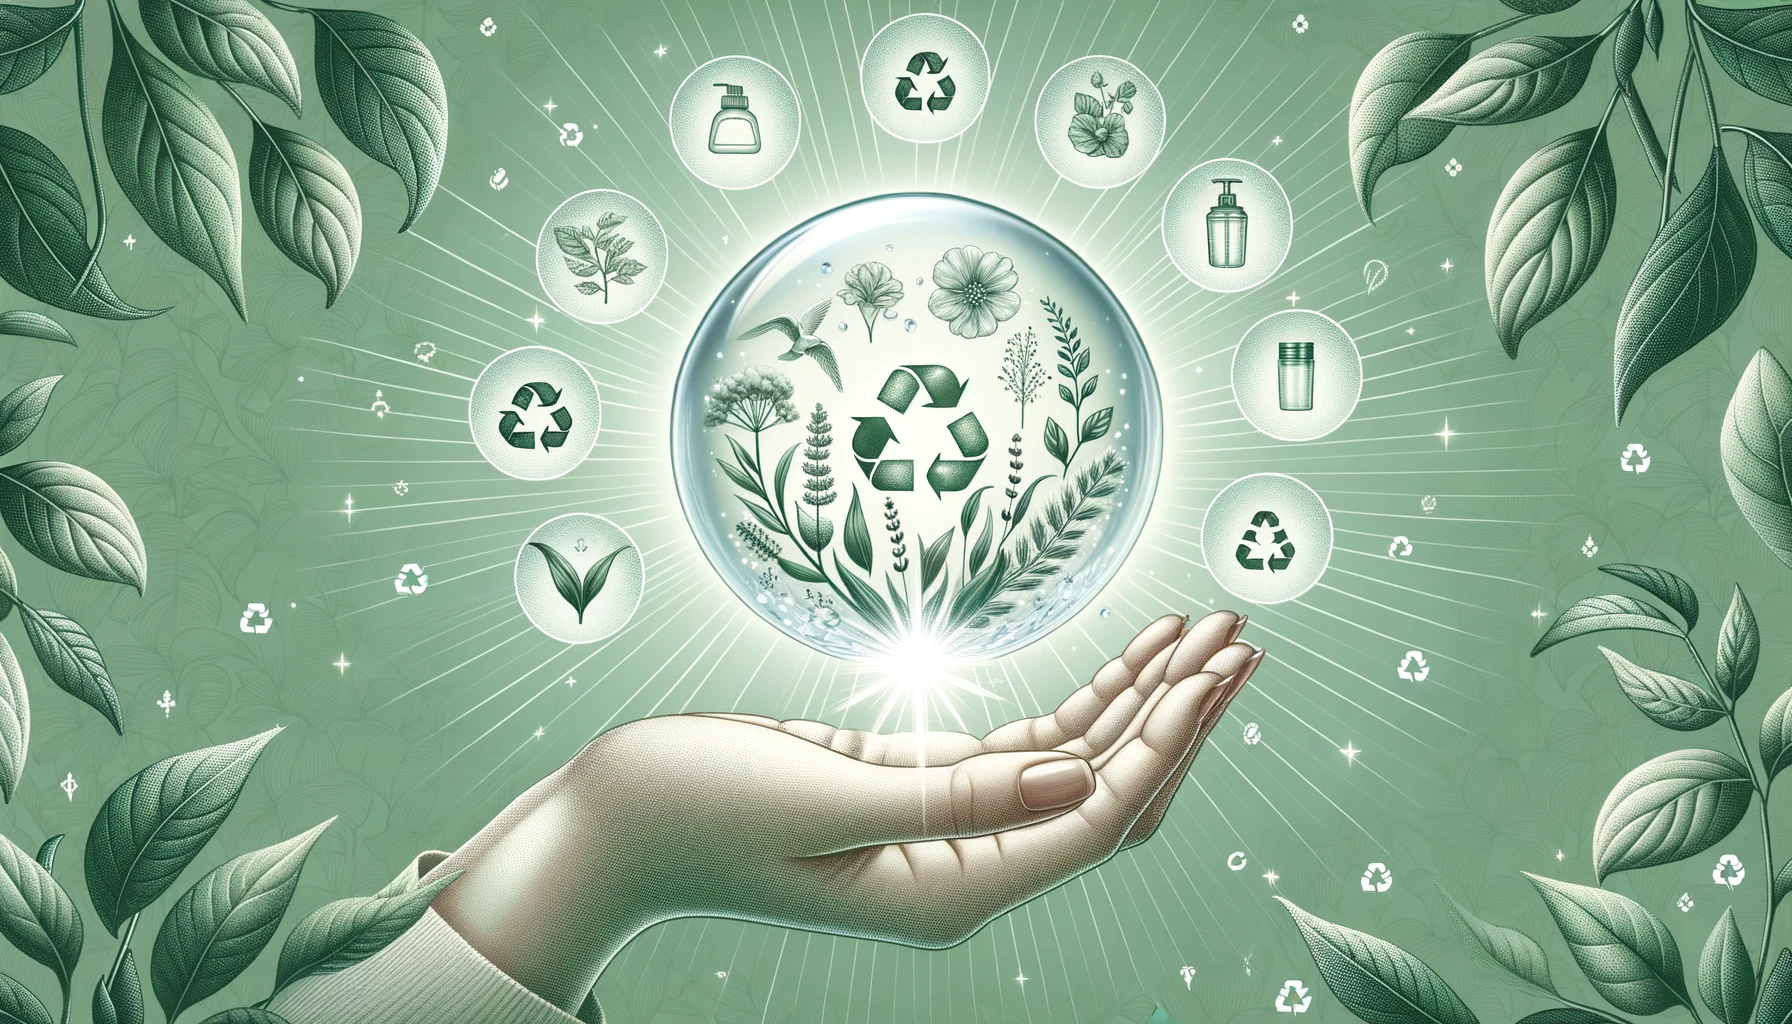 Artistic illustration of a hand holding a glowing orb with natural and organic beauty product symbols, surrounded by botanical elements on a green eco-conscious background.